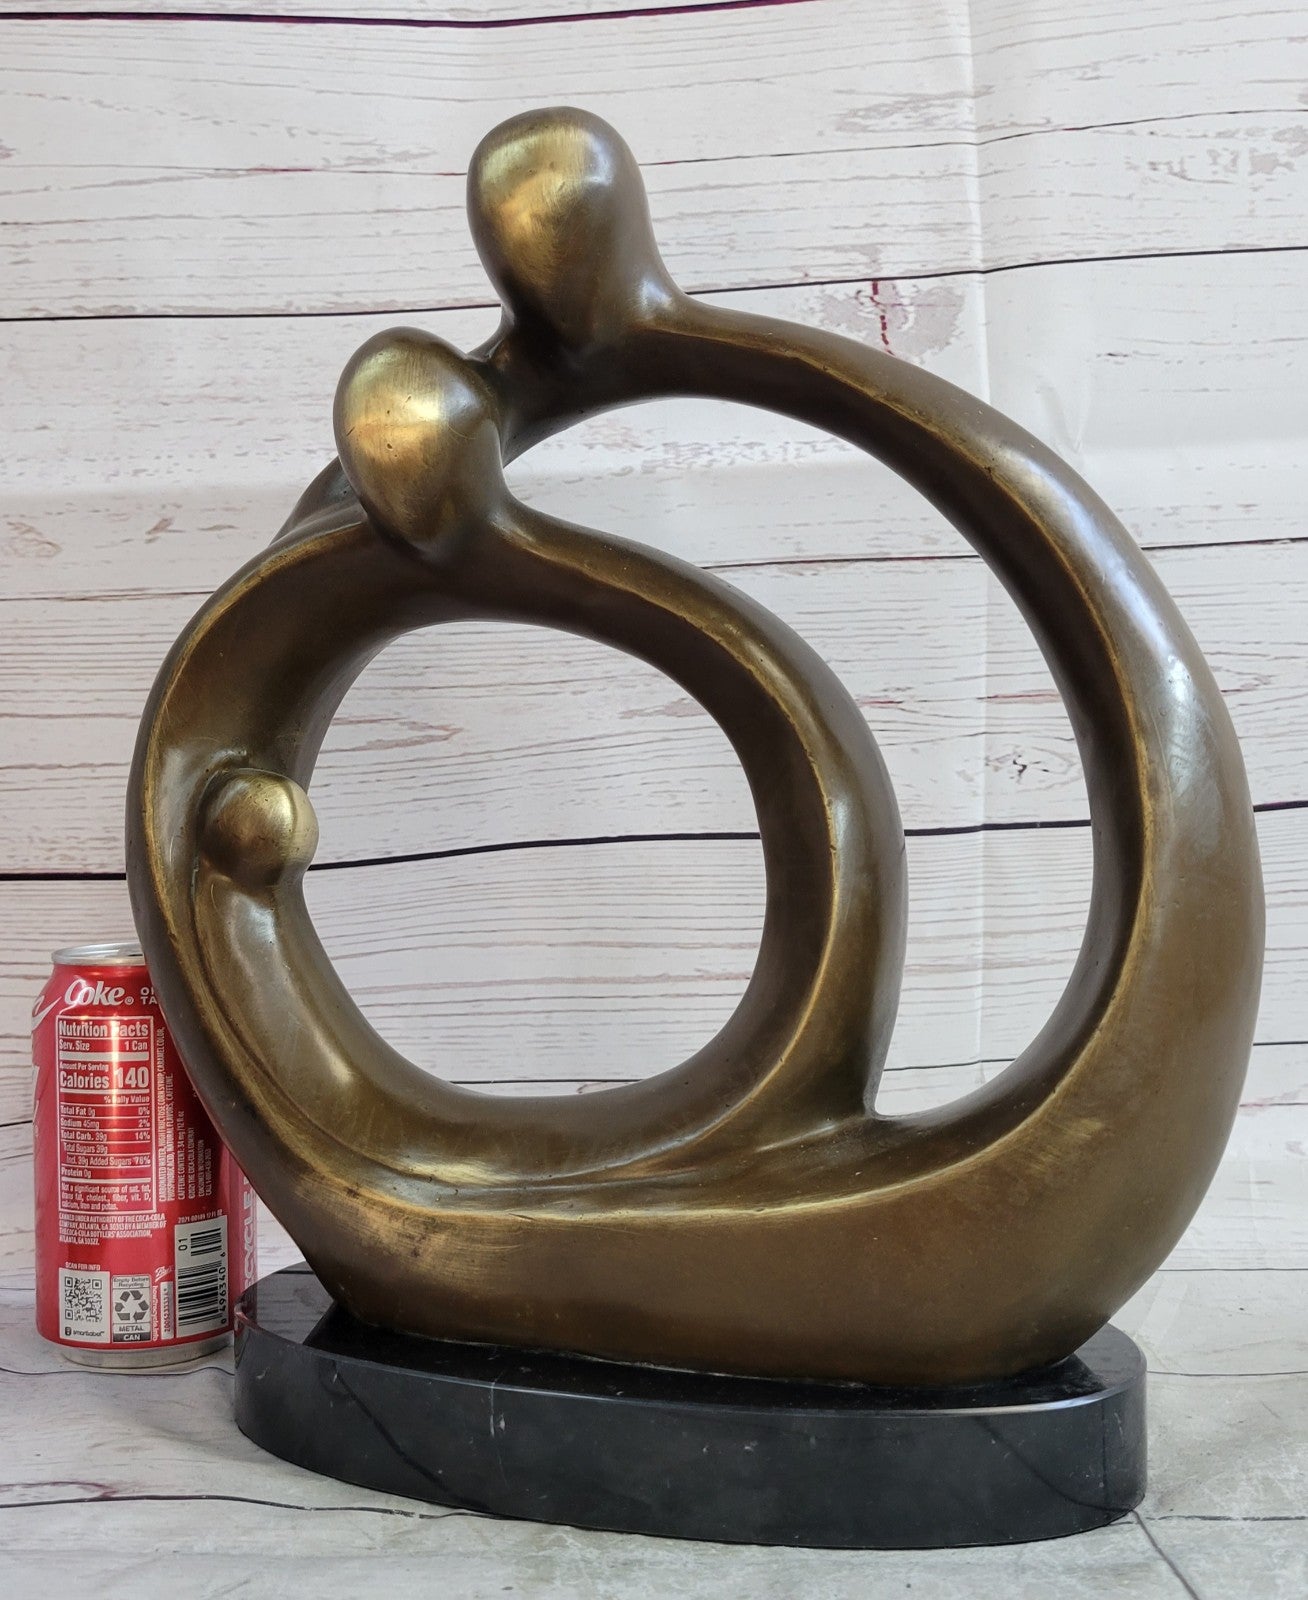 Abstract Modern Romance Bronze Statue by Fransisci Lost Wax